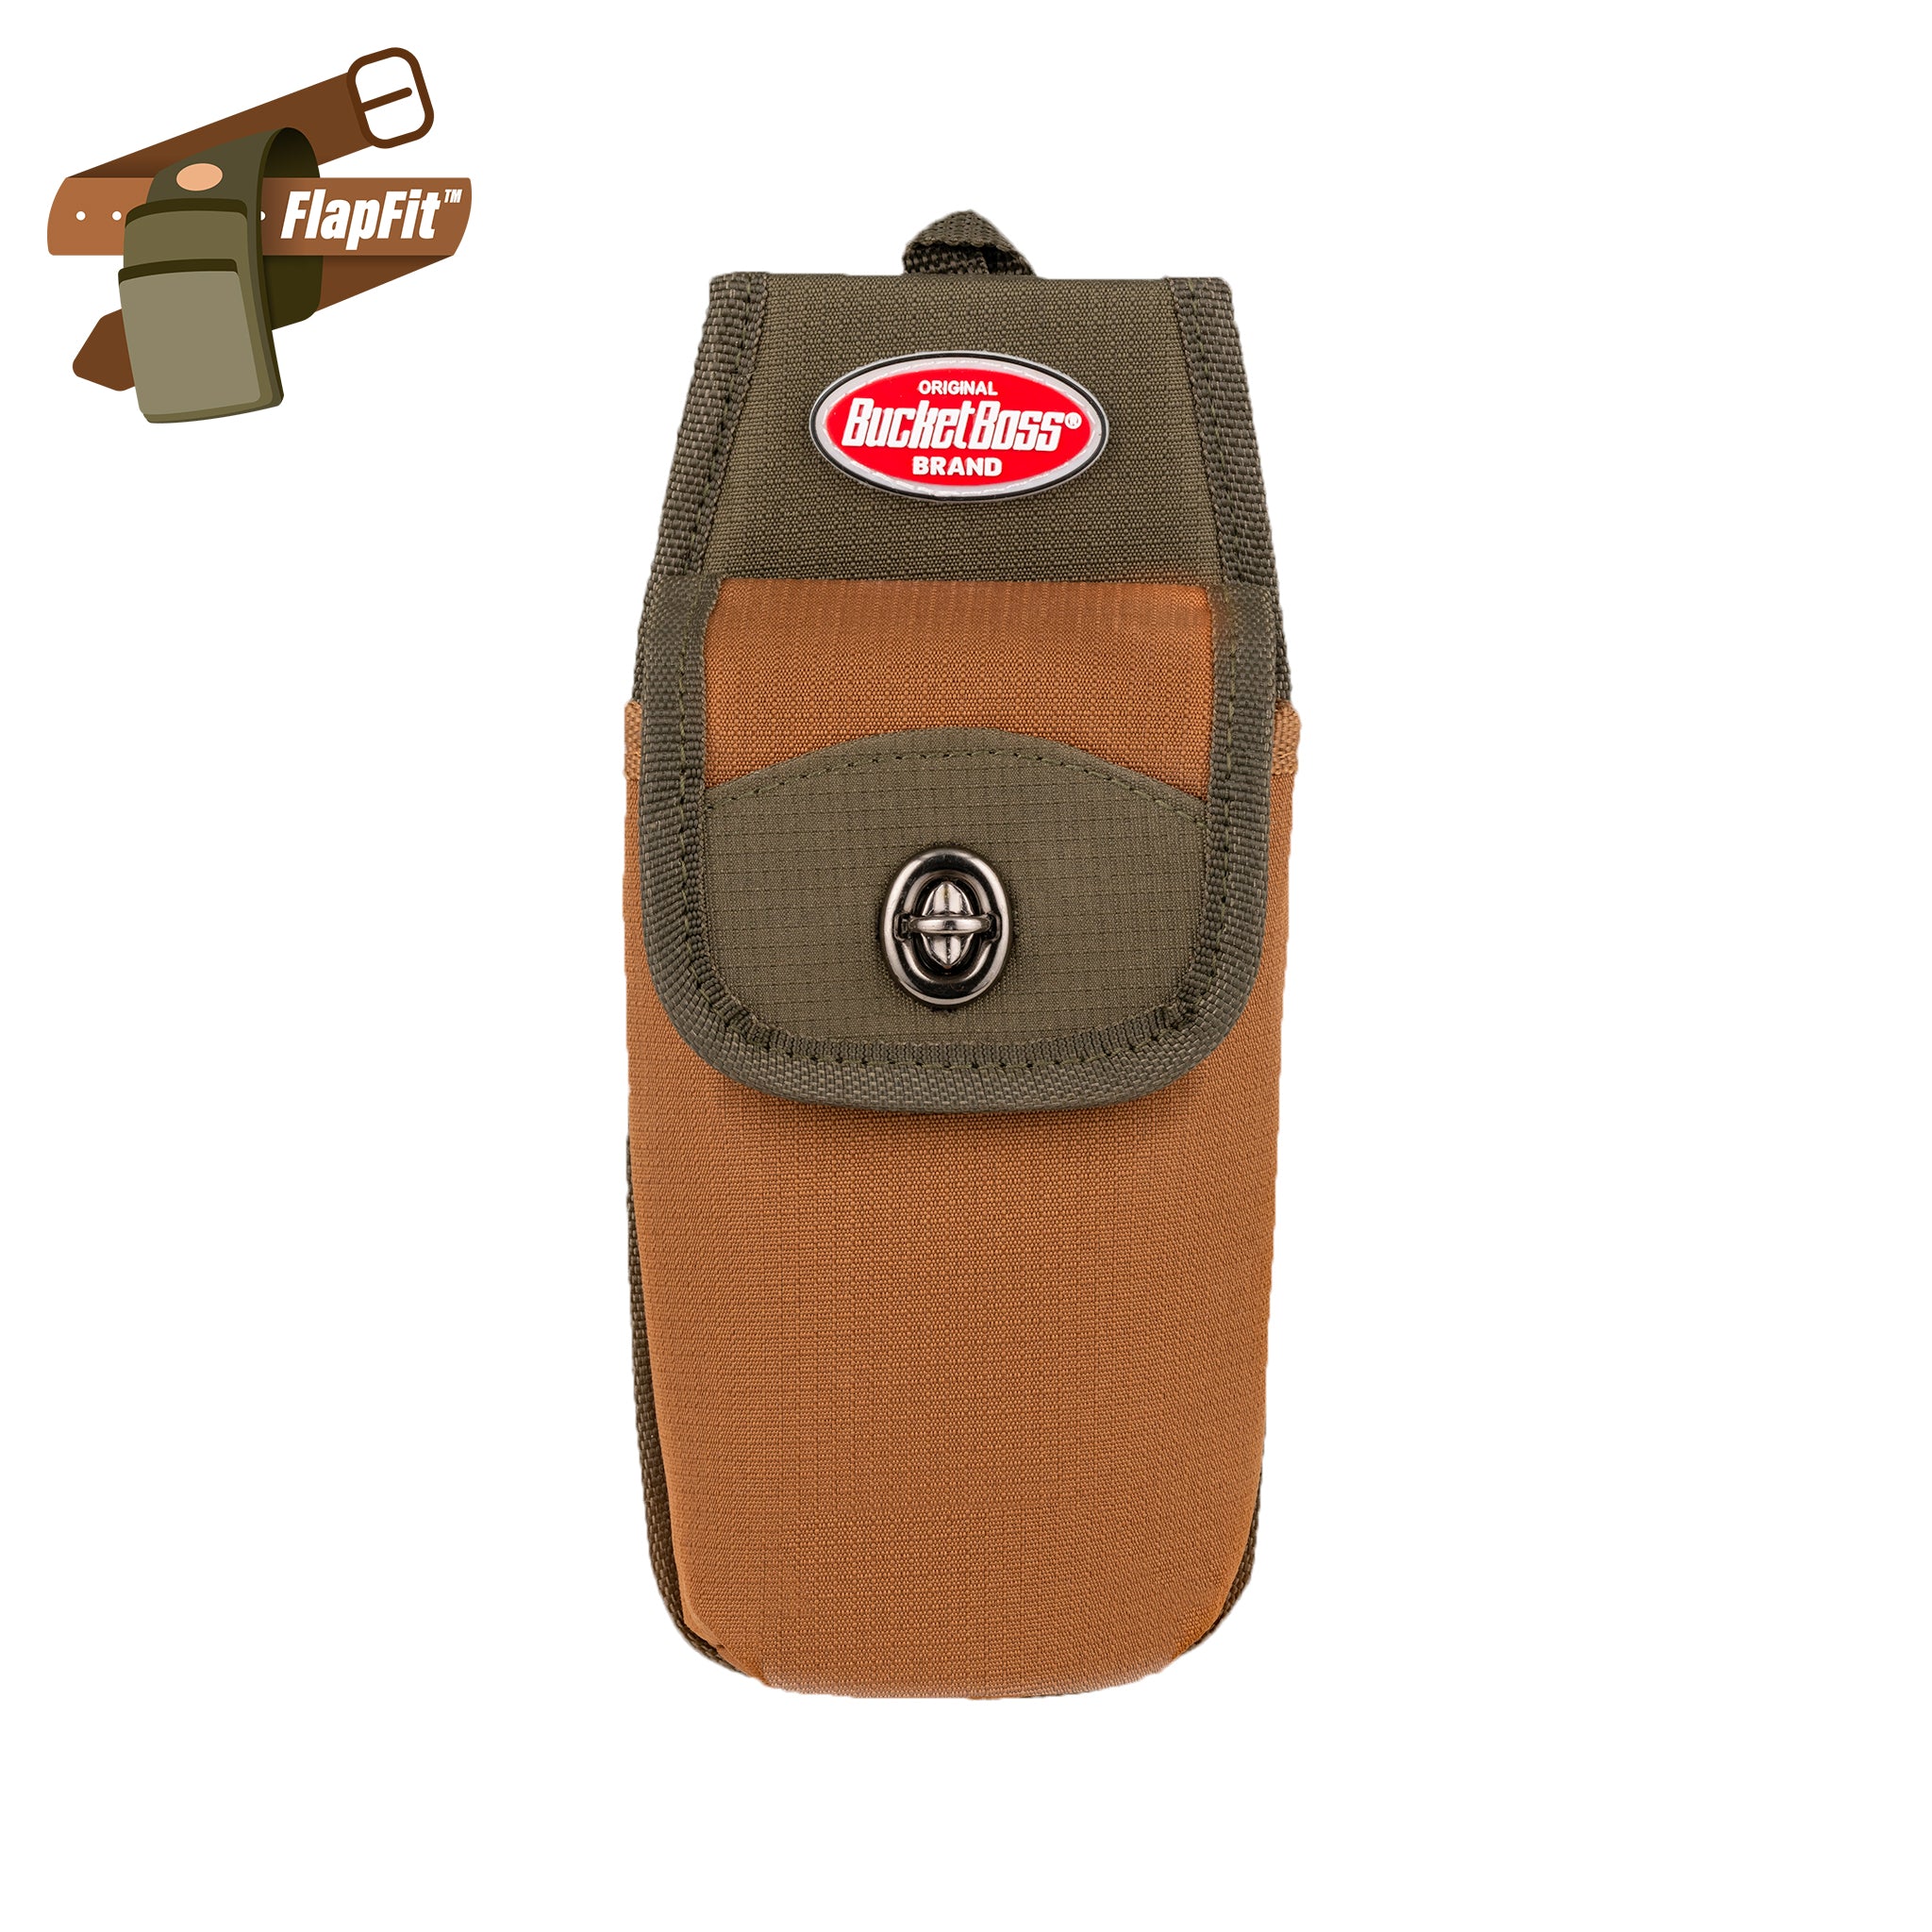 Bucket Boss Rear Guard Pouch with FlapFit 54120